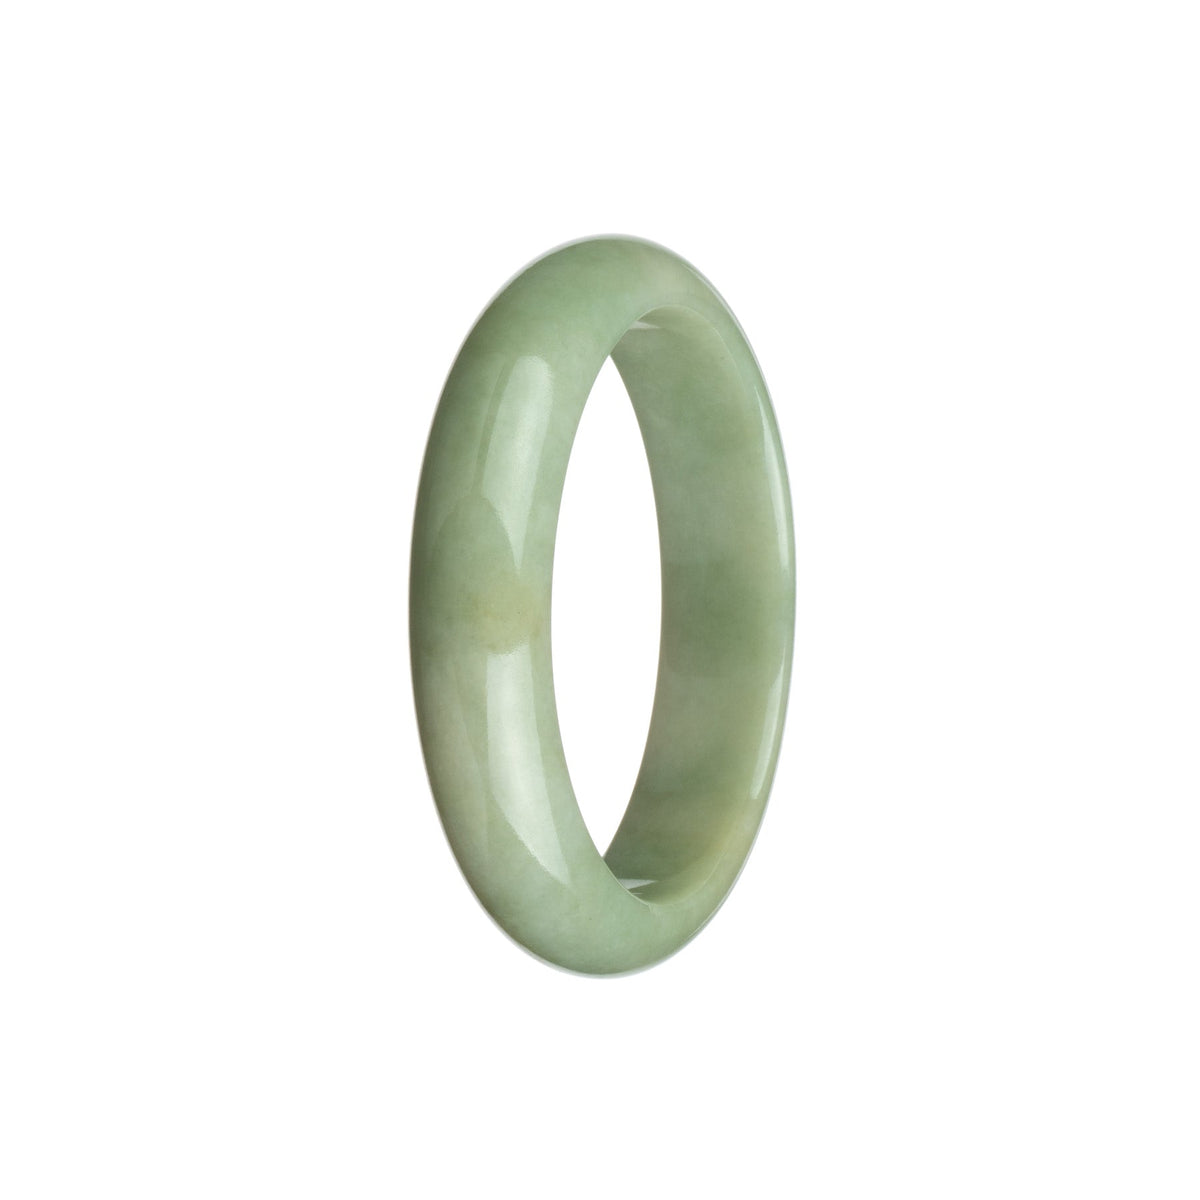 A beautiful off-white jade bangle bracelet with a half-moon design, made from genuine Grade A jadeite jade. Perfect for adding a touch of elegance to any outfit.